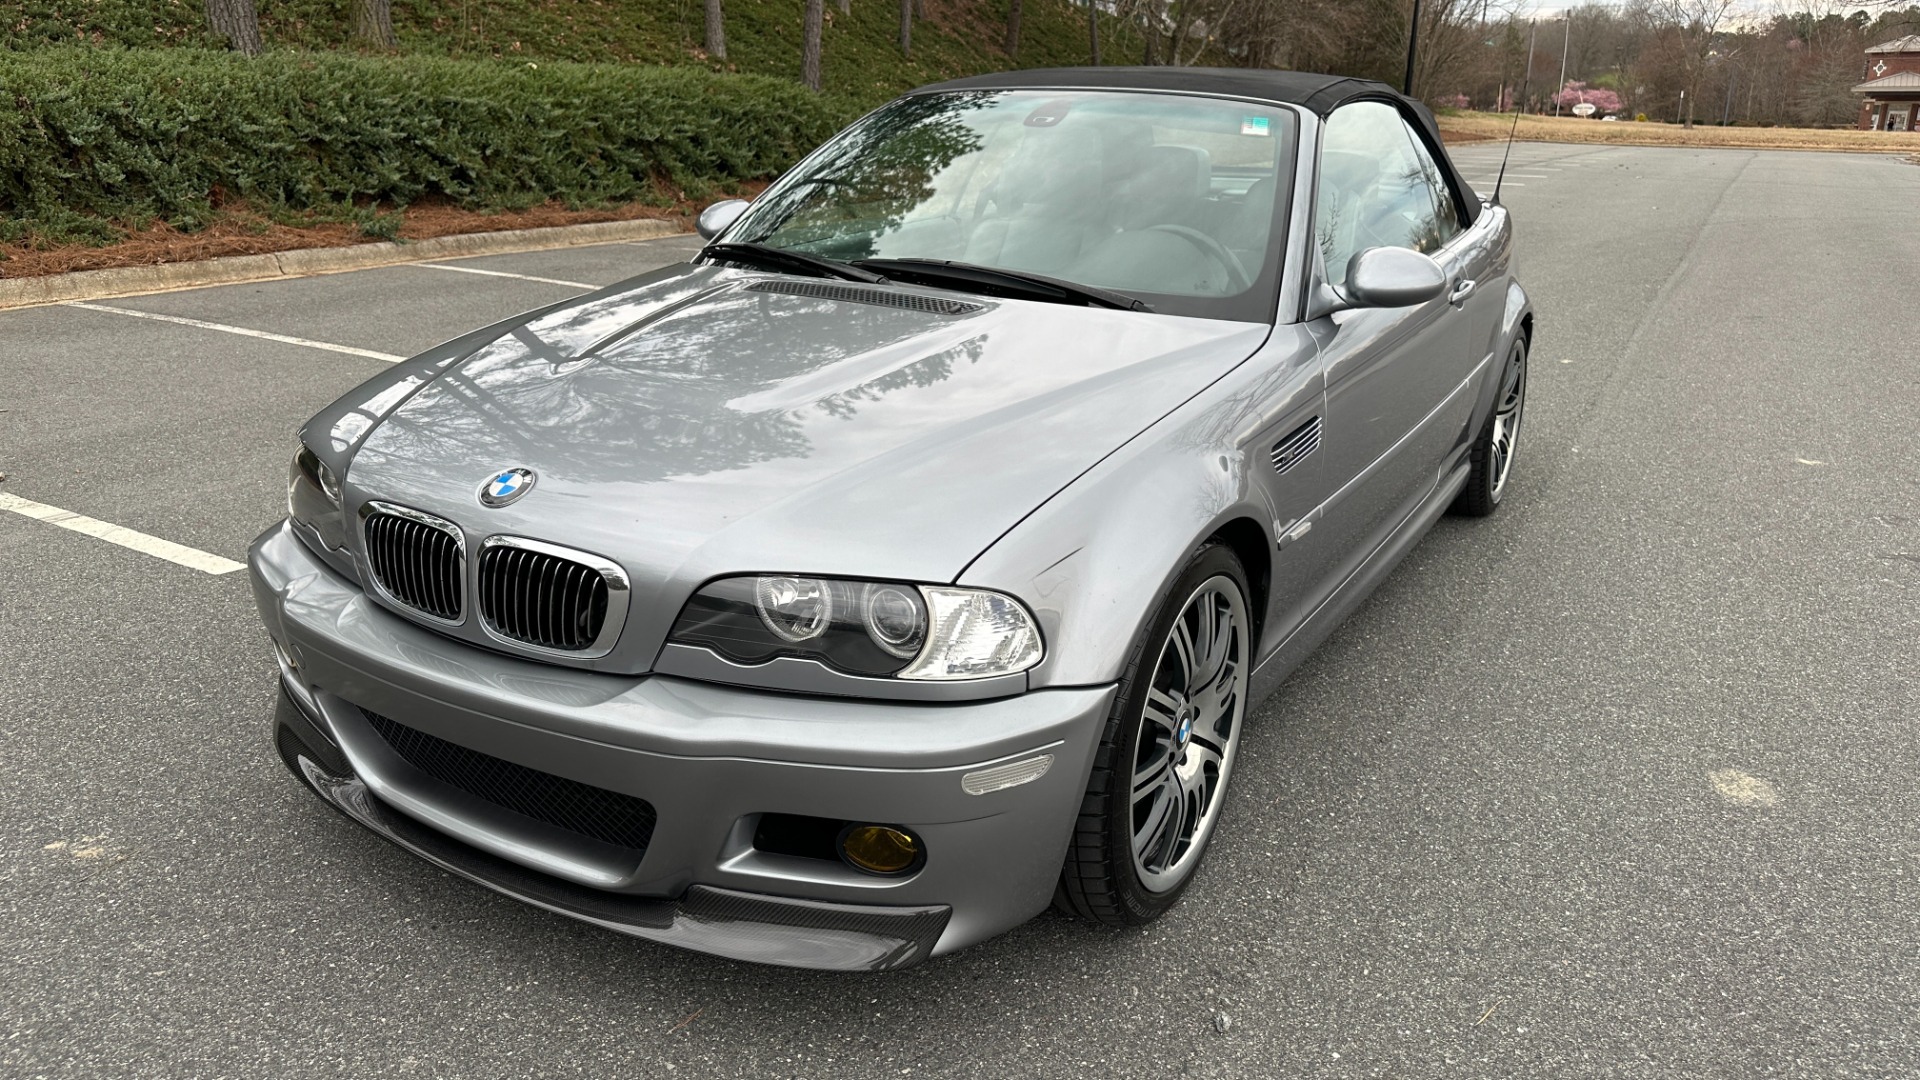 Used 2006 BMW M3 CONVERTIBLE / SMG AUTO / LEATHER / INLINE 6CYL / CARBON FIBER for sale $24,995 at Formula Imports in Charlotte NC 28227 42